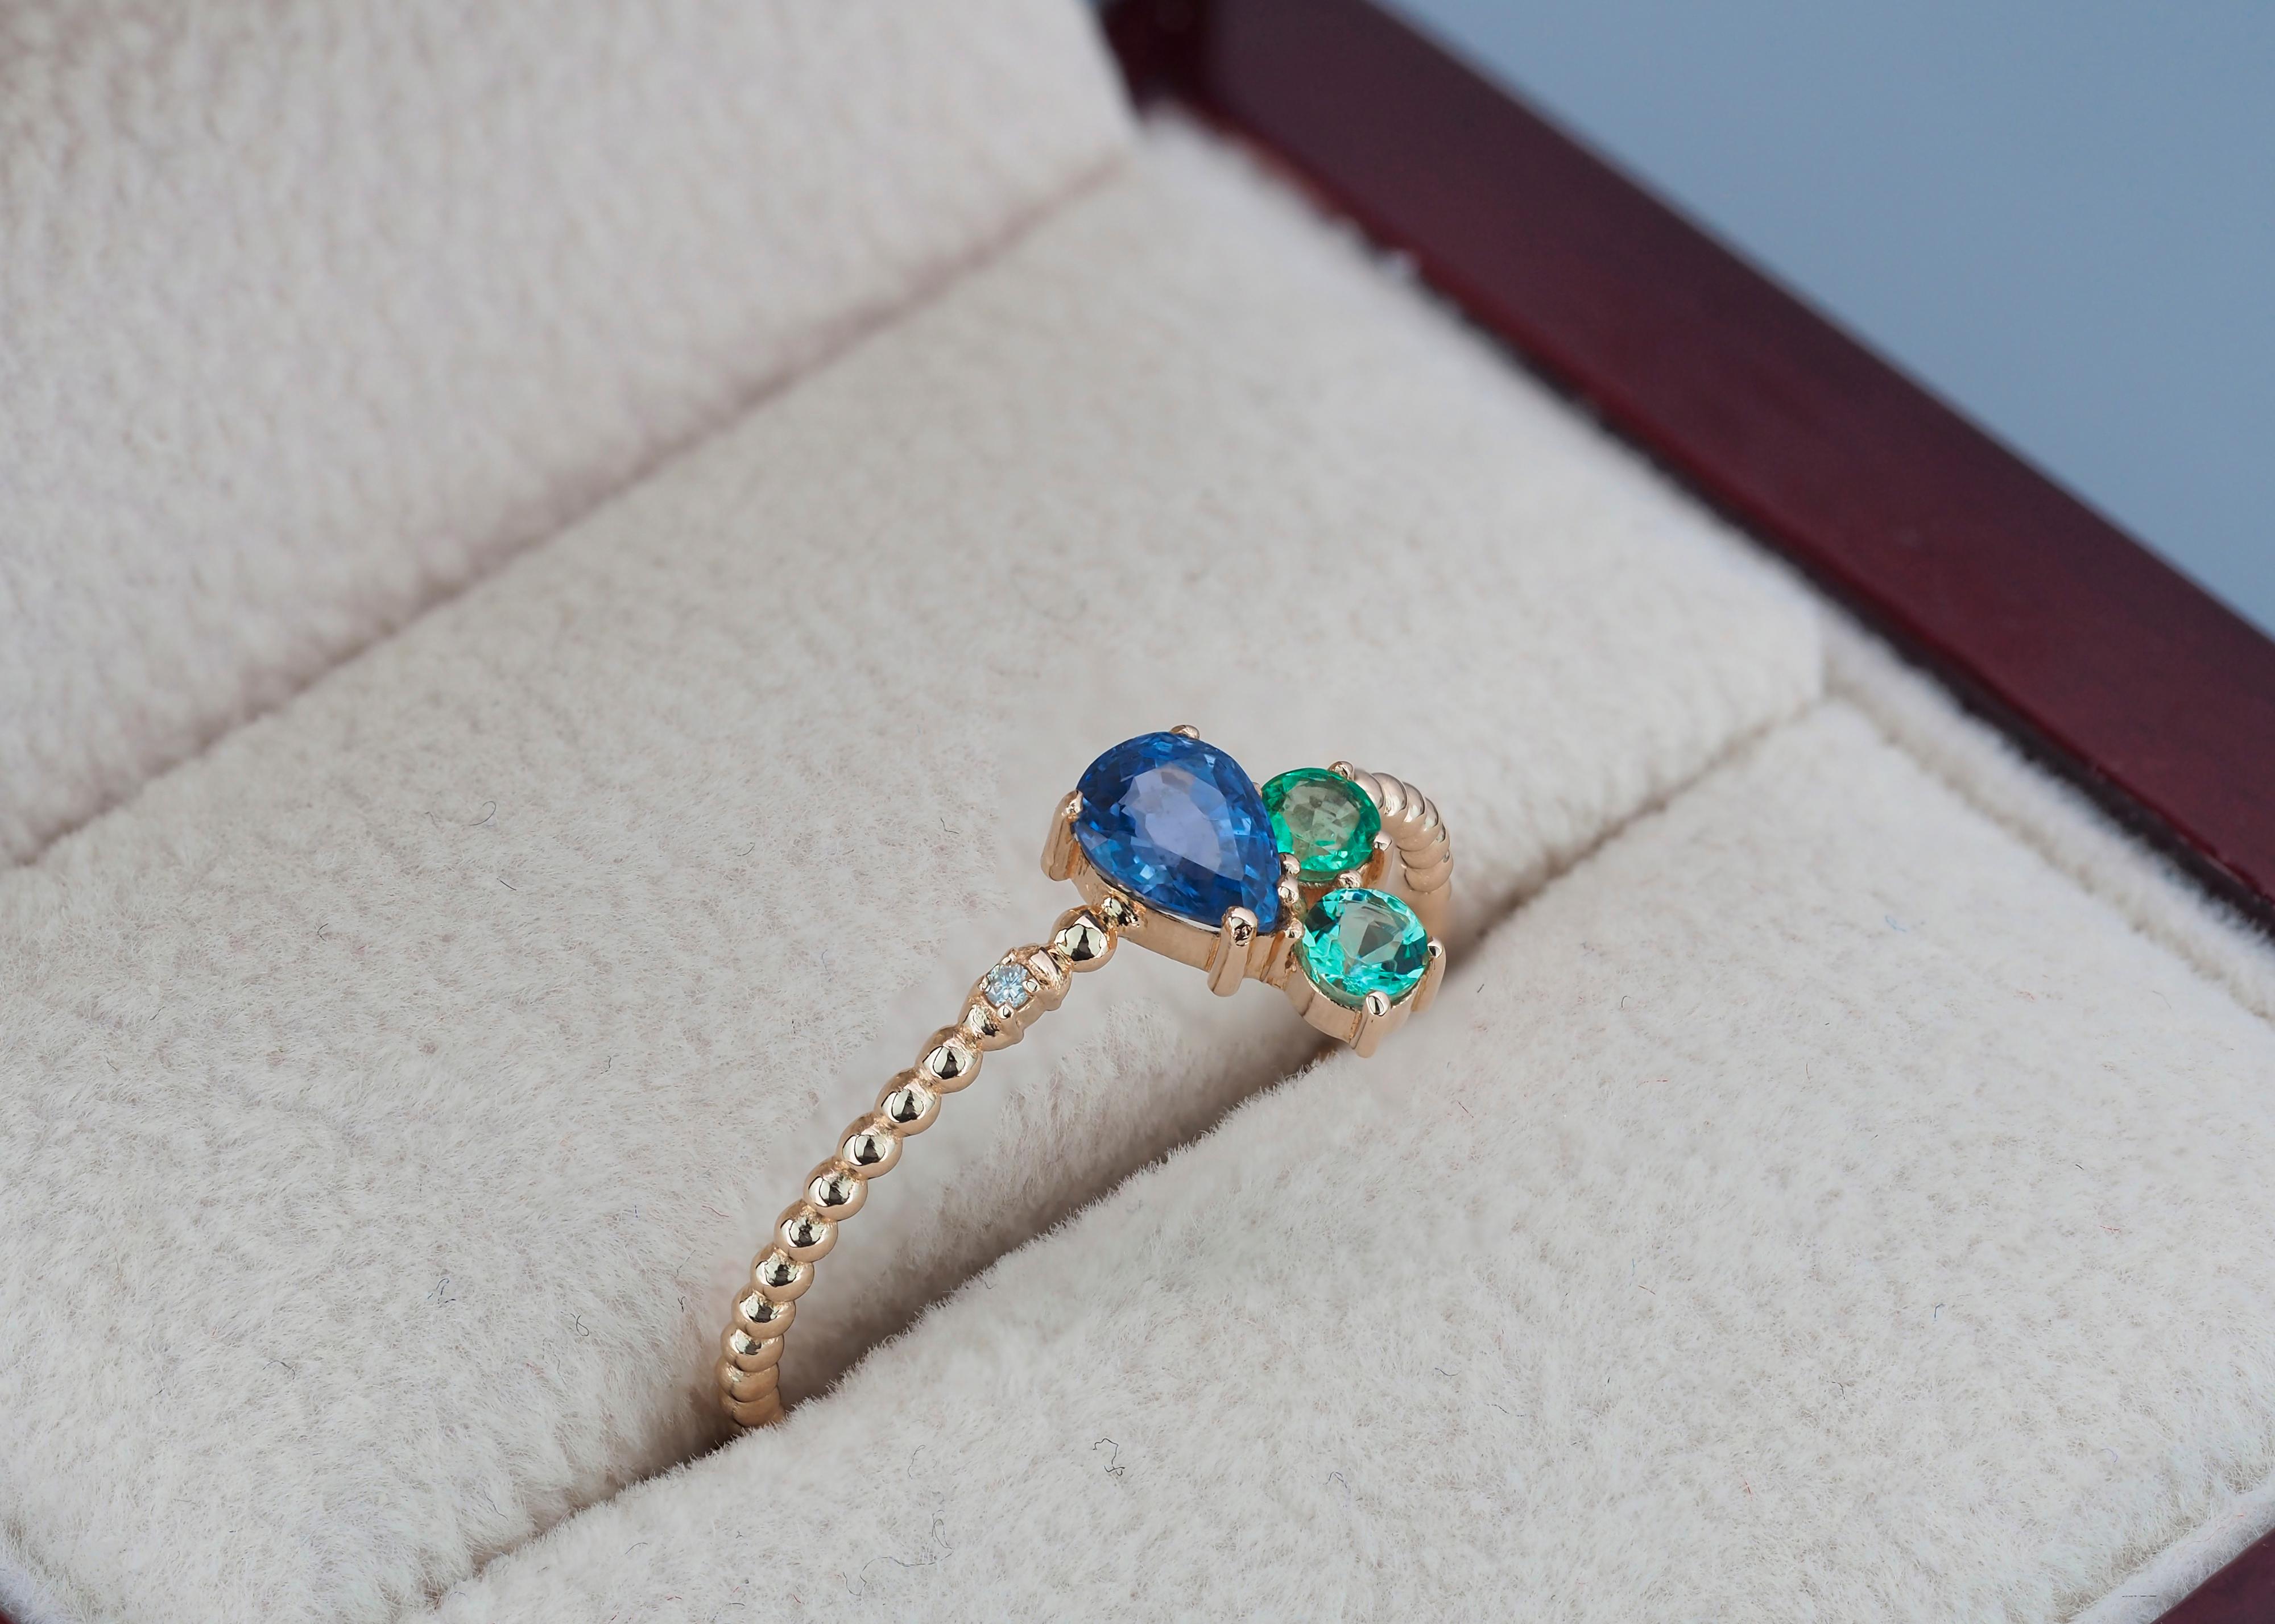 Women's 14k Gold Ring with Sapphire, Emeralds and Diamond